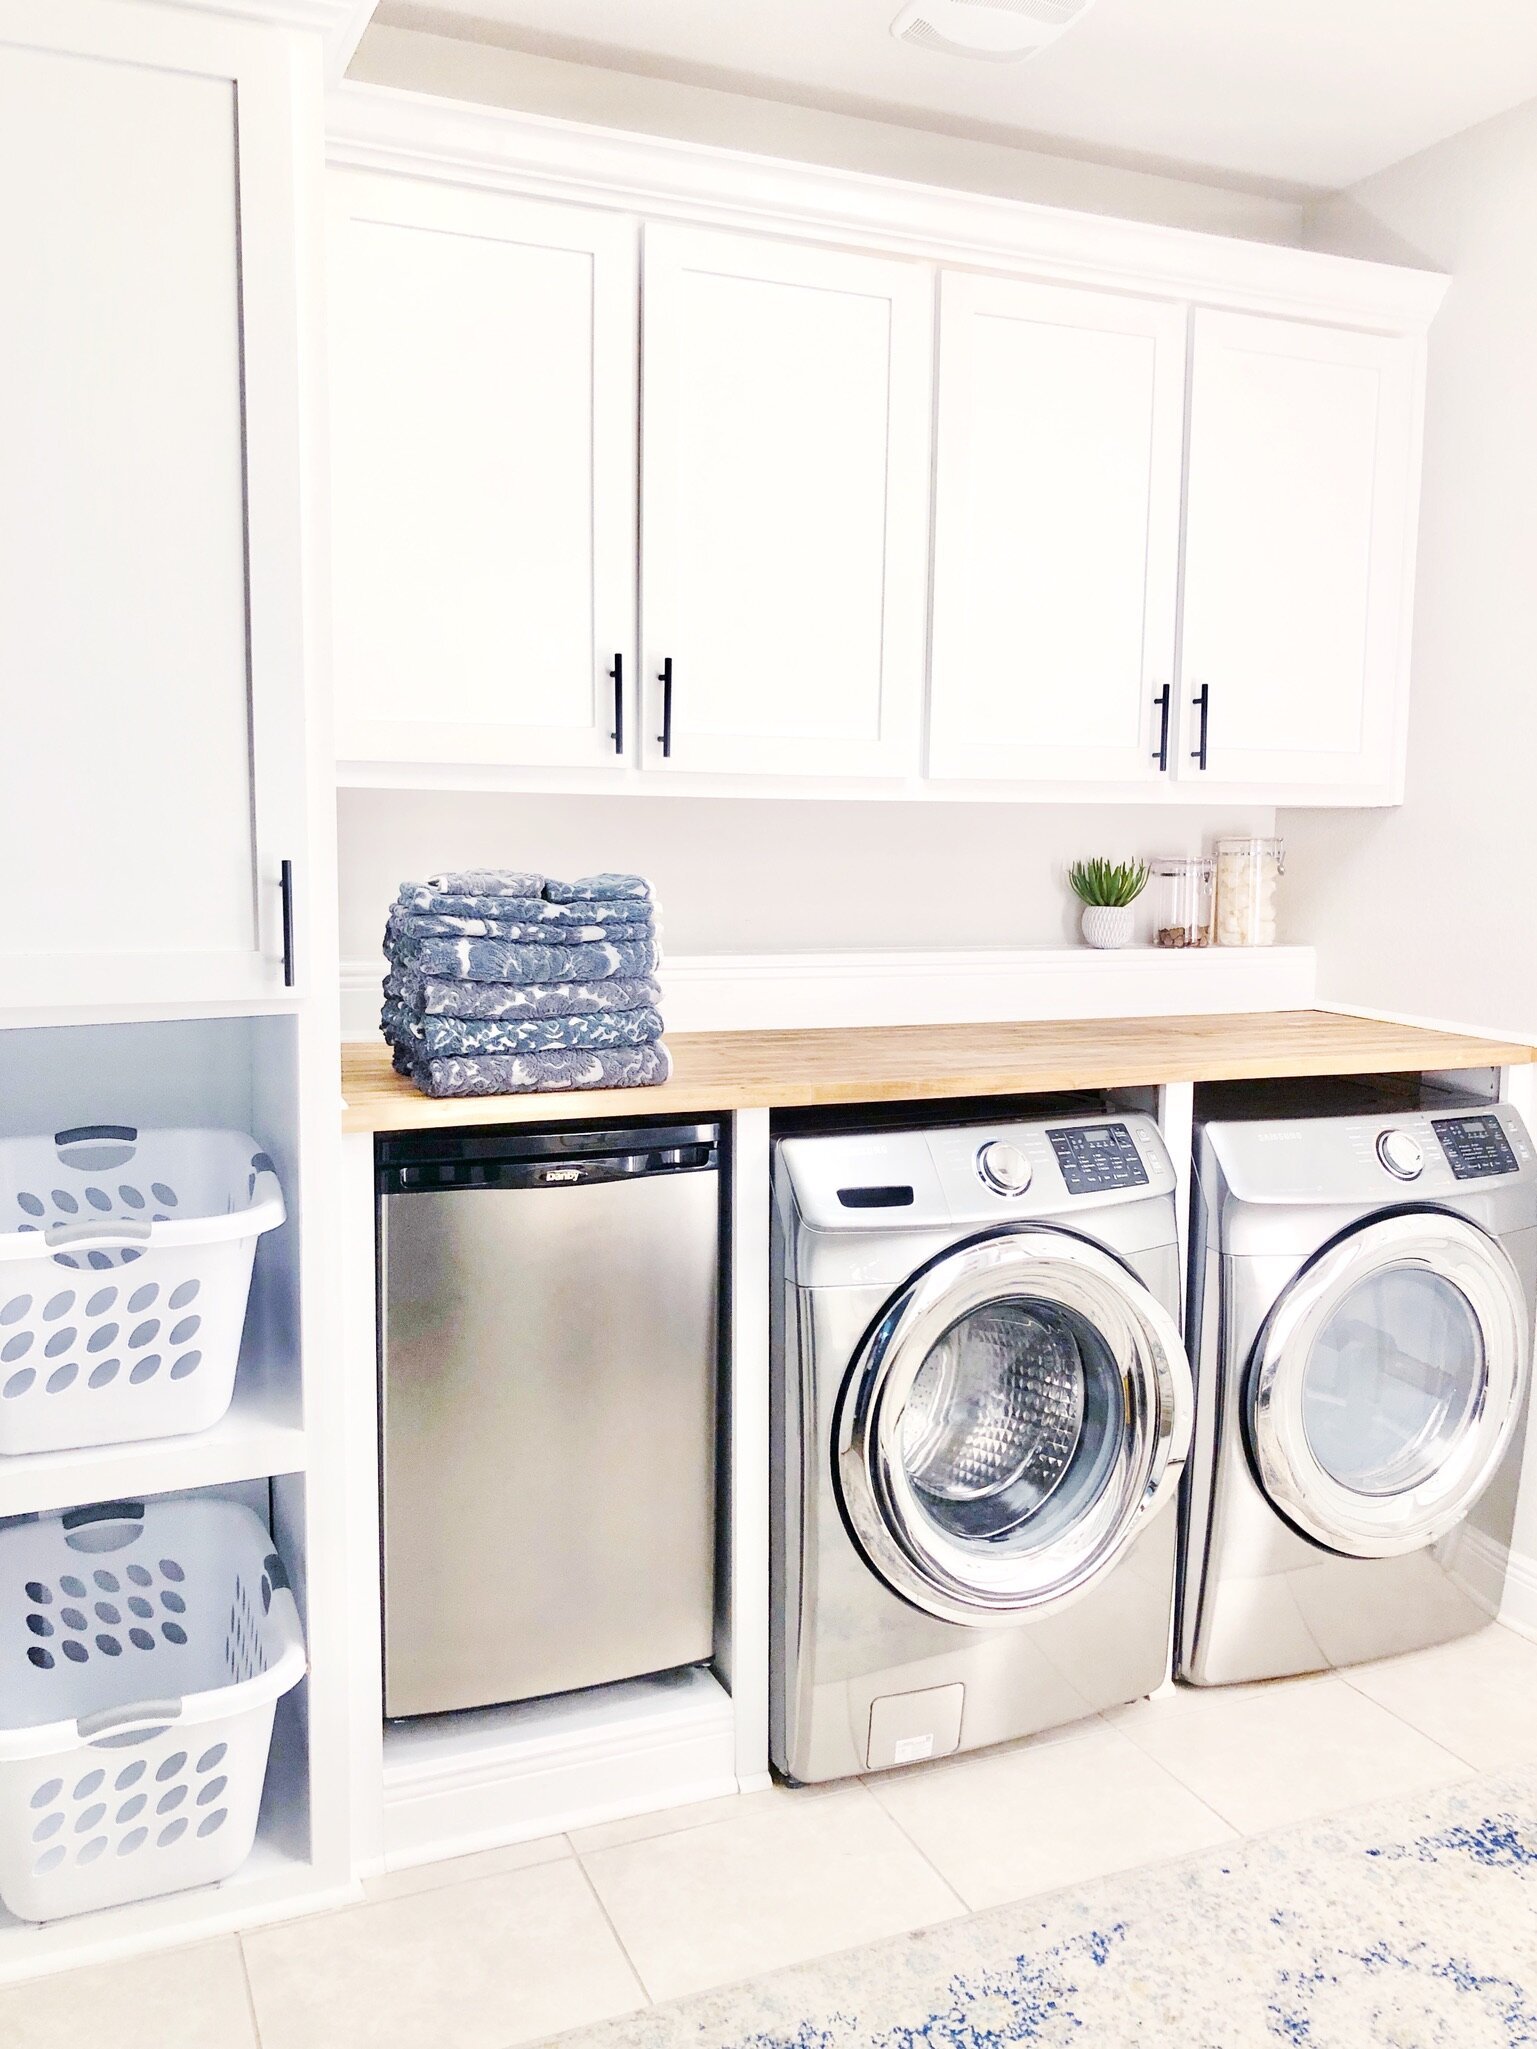 Custom Solutions in the Laundry Room